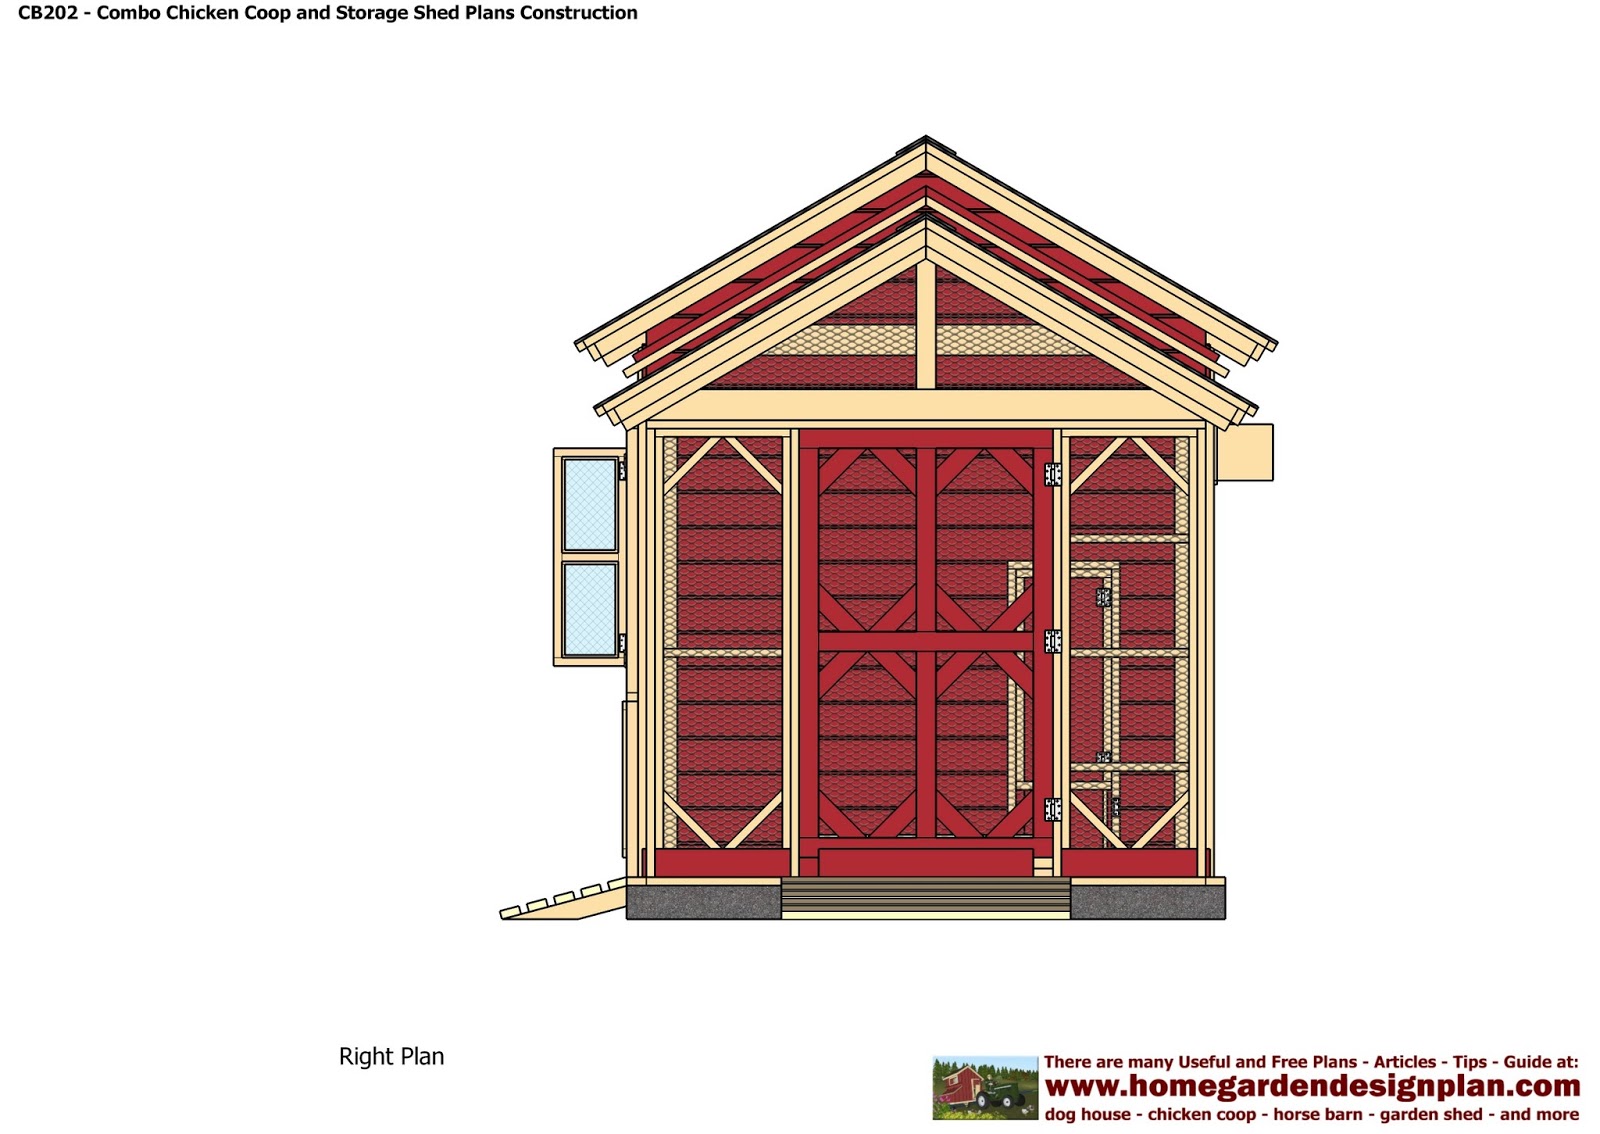 CB202 Combo Plans Chicken Coop Plans Construction Garden Sheds 